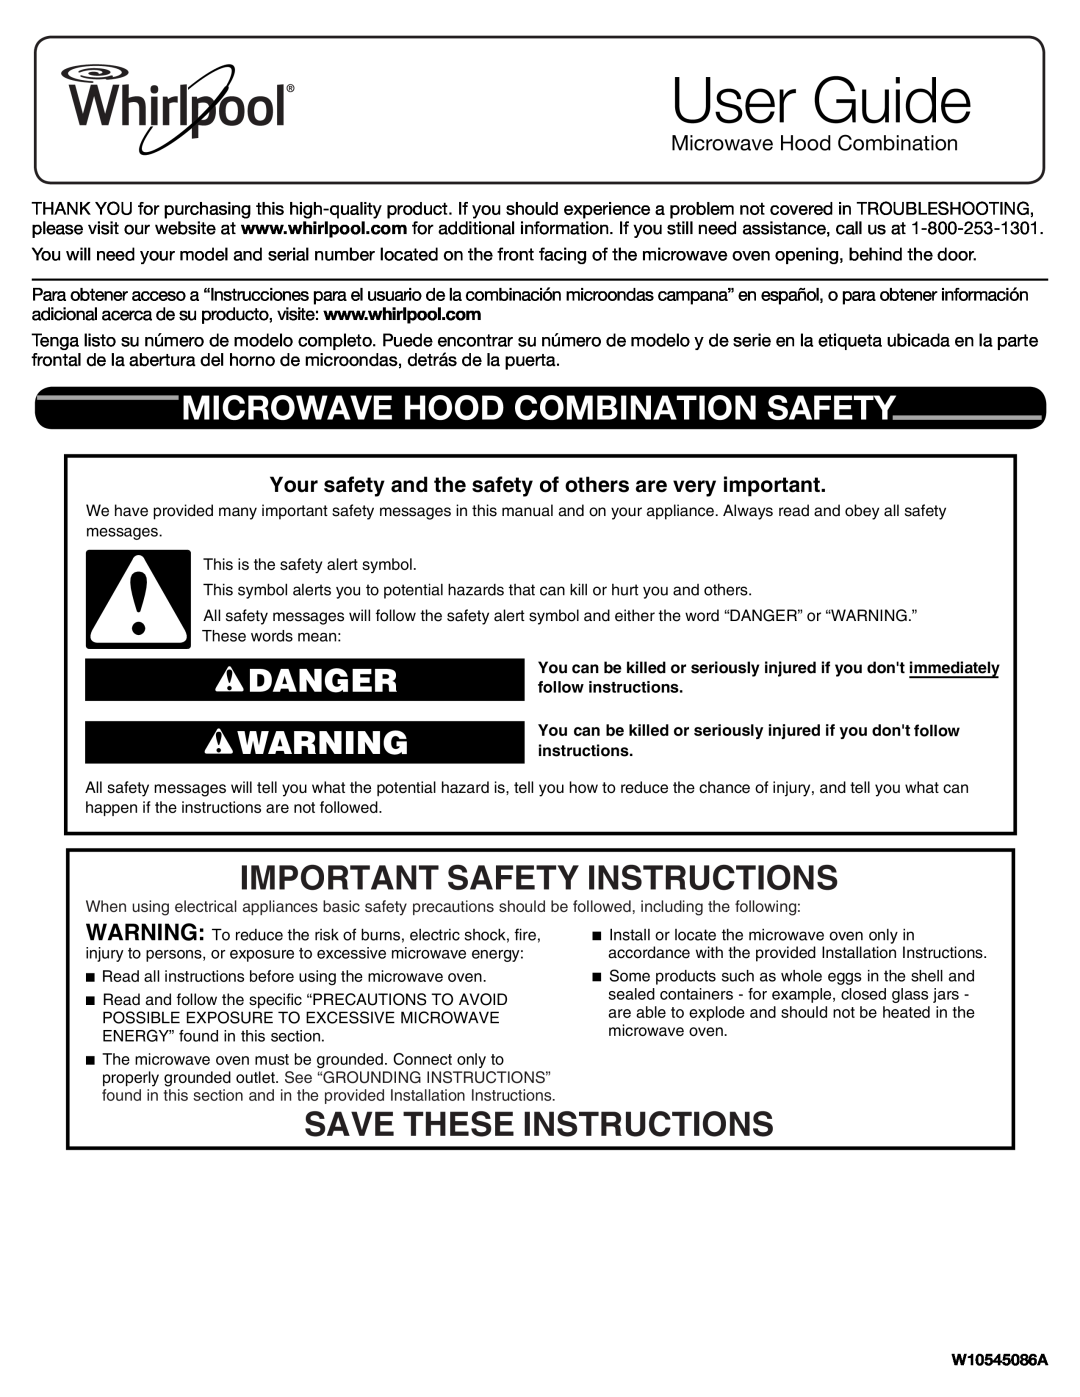 Whirlpool WMH75520AW important safety instructions Microwave Hood Combination Safety, Important Safety Instructions 